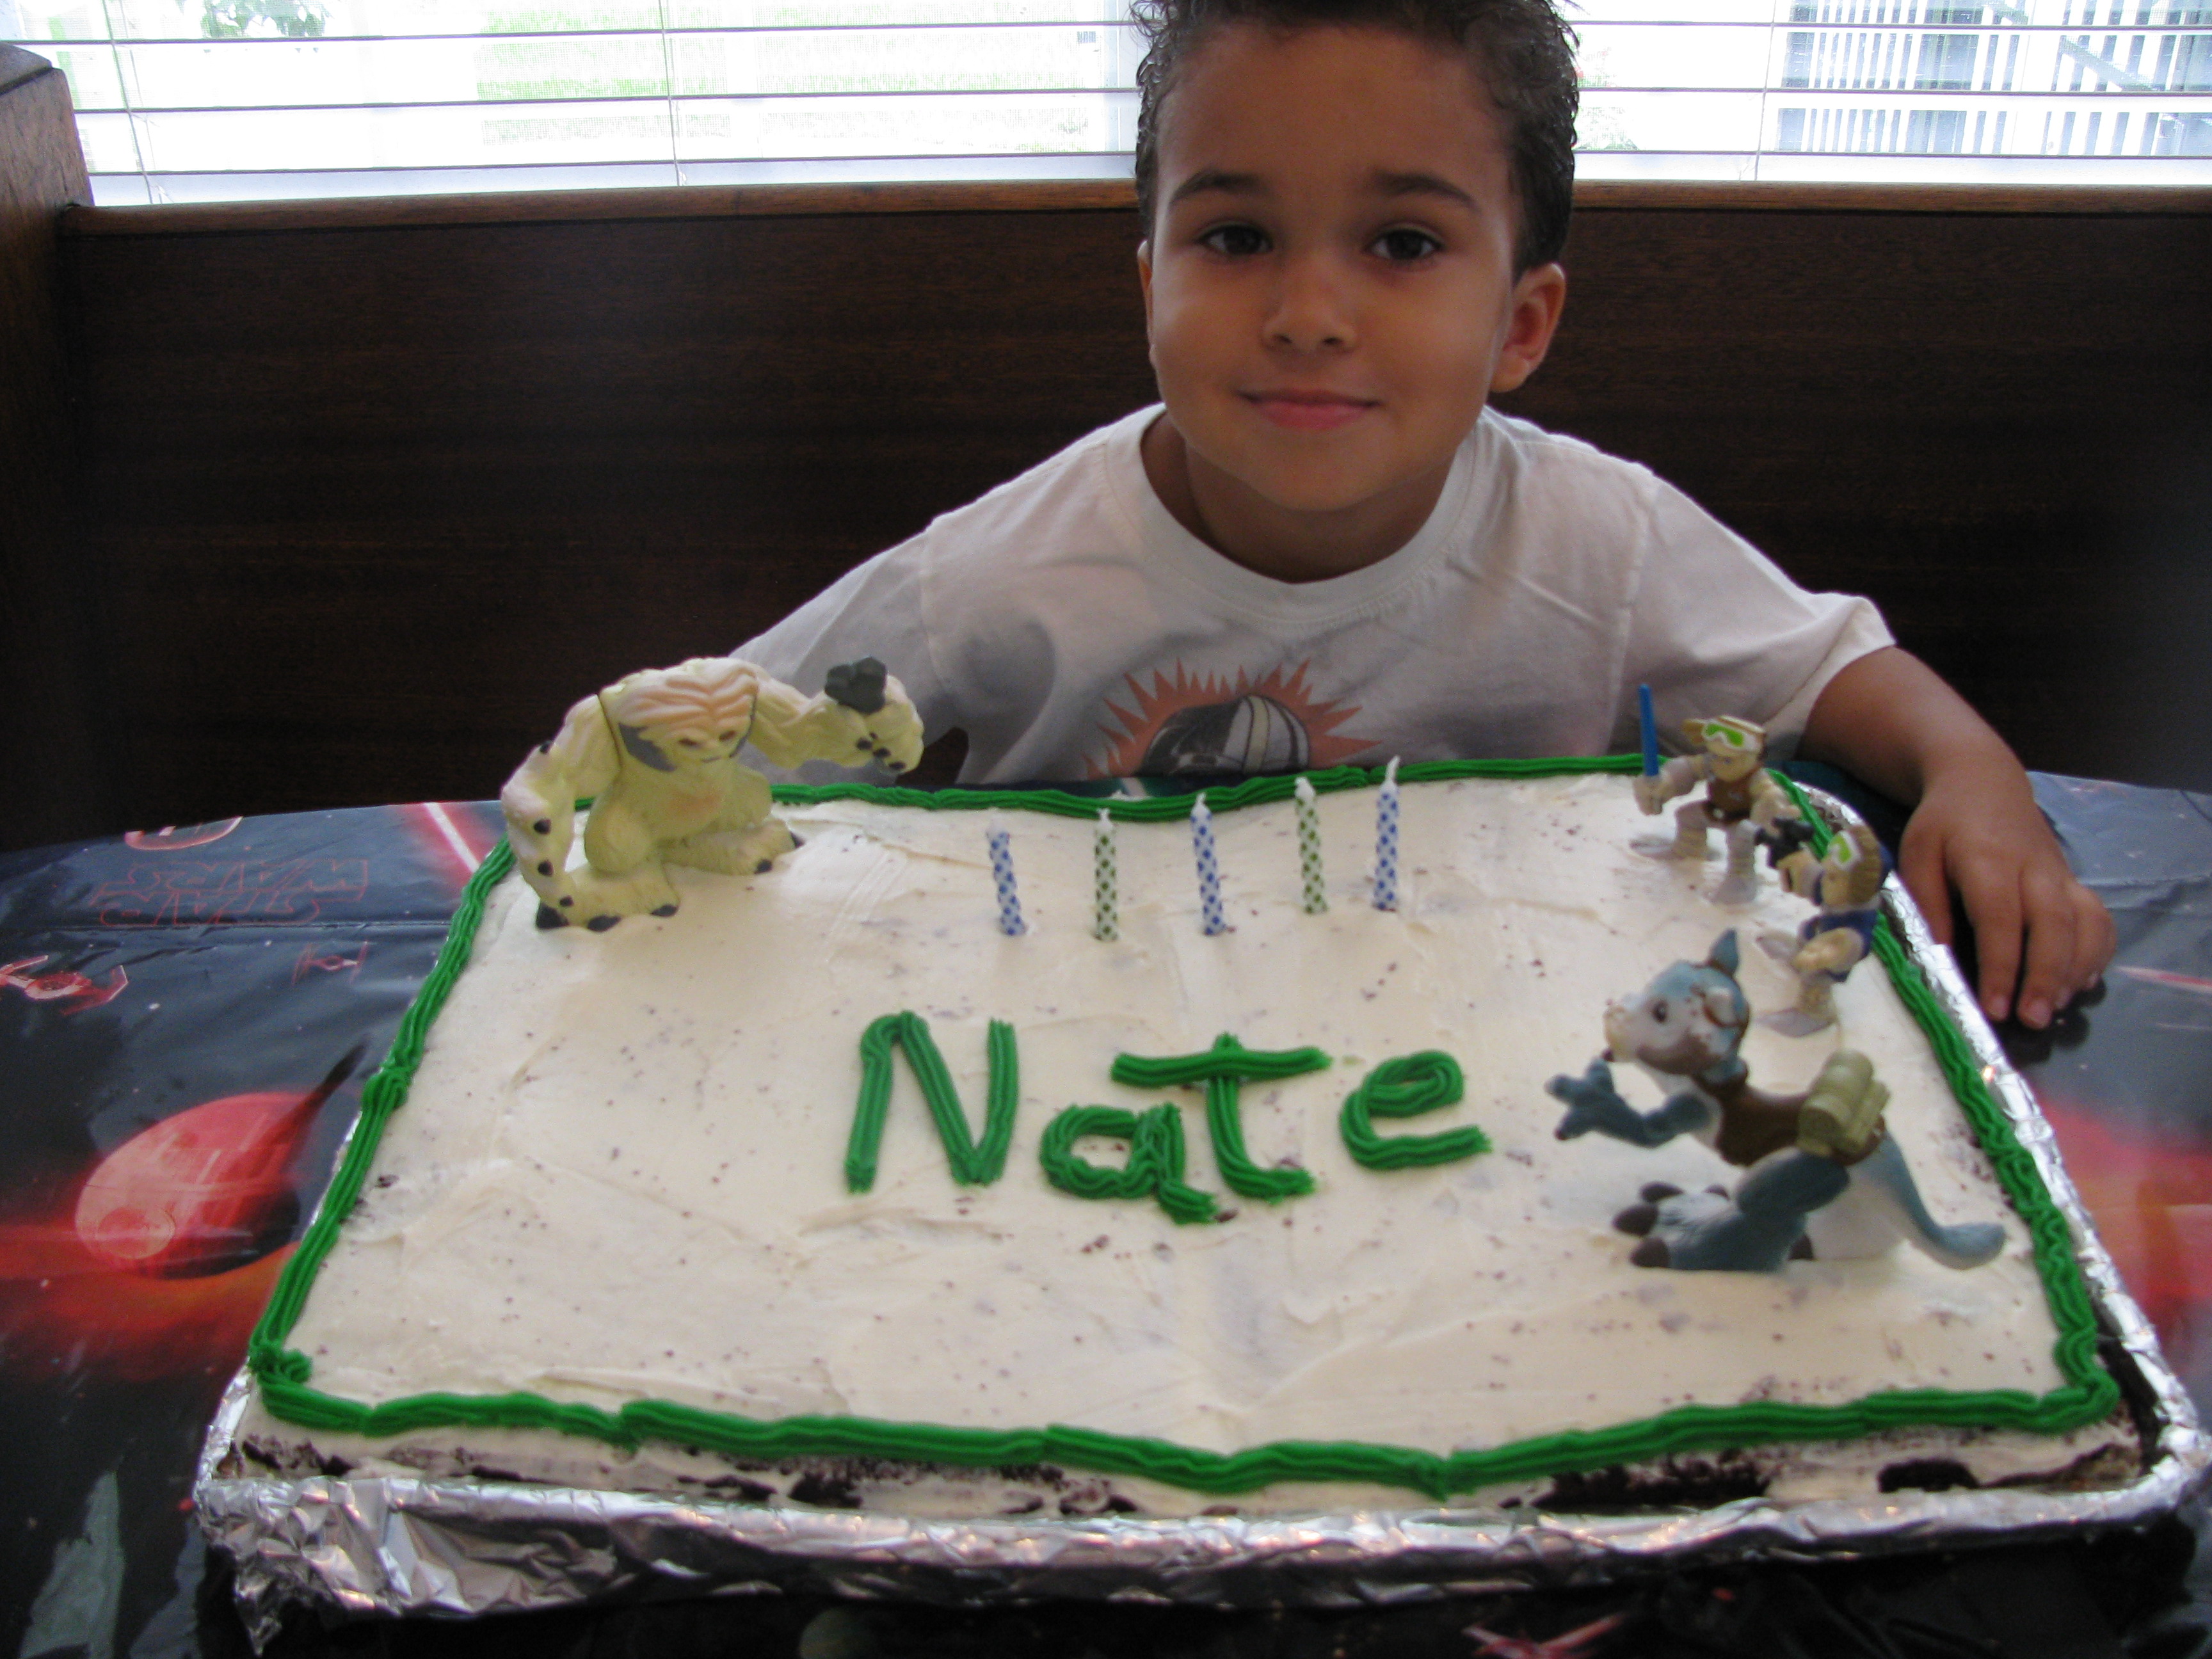 Nate chose the white frosting because it "looks like snow" and he wanted to create the snow-something attacking Luke while he's riding on that kangaroo-looking creature.